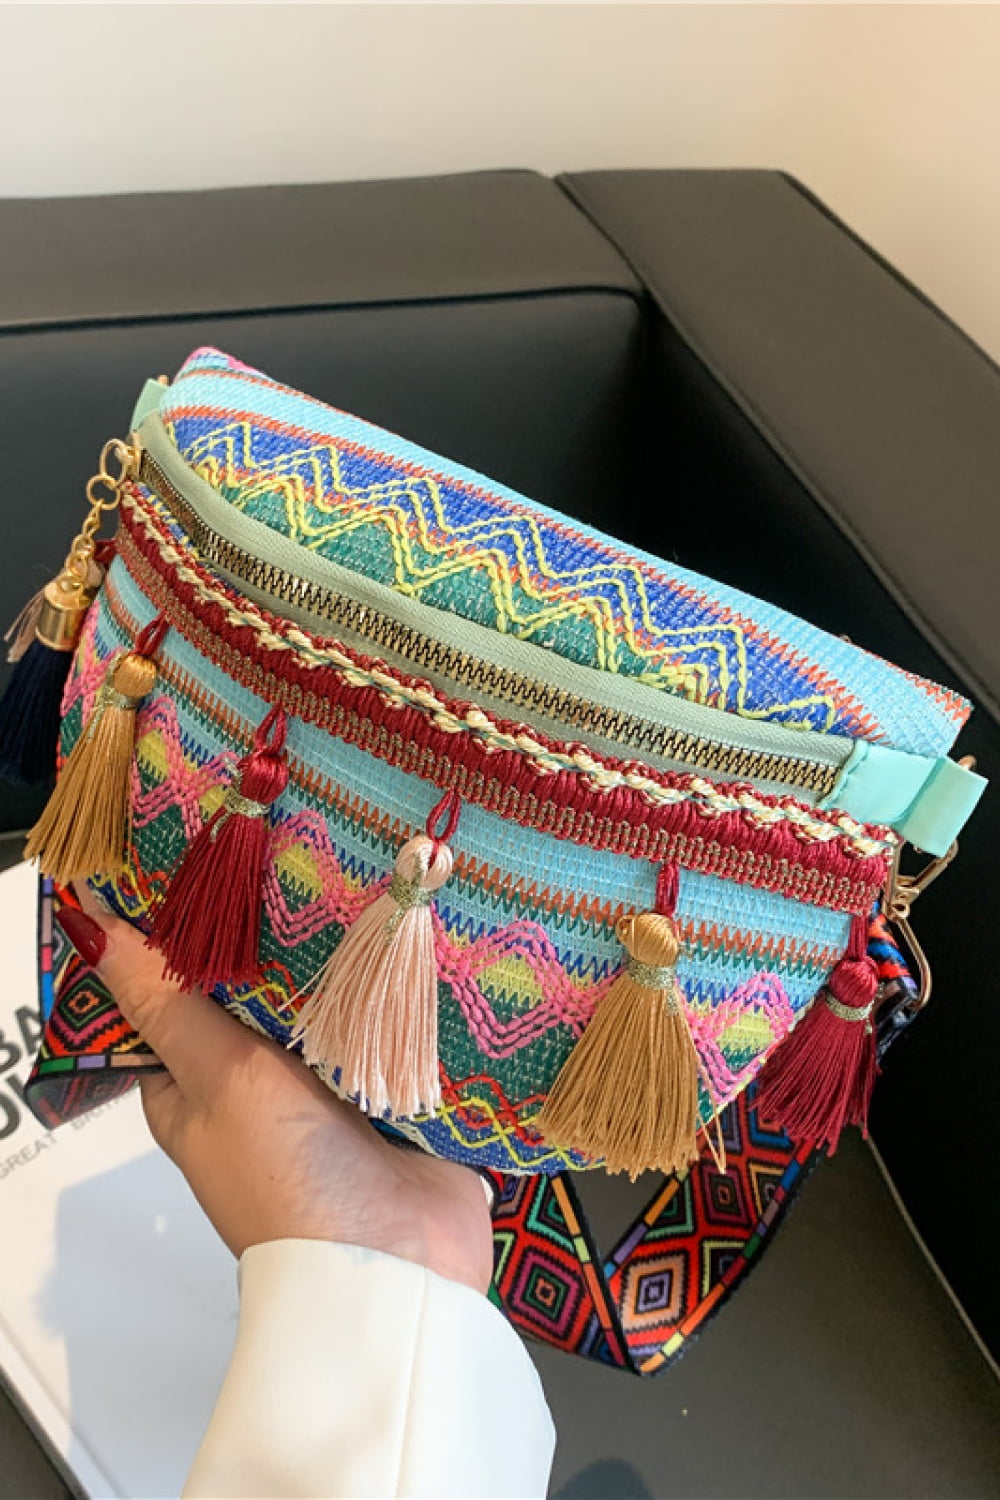 SO CHIC Bohemian Sling Bag with Tassels